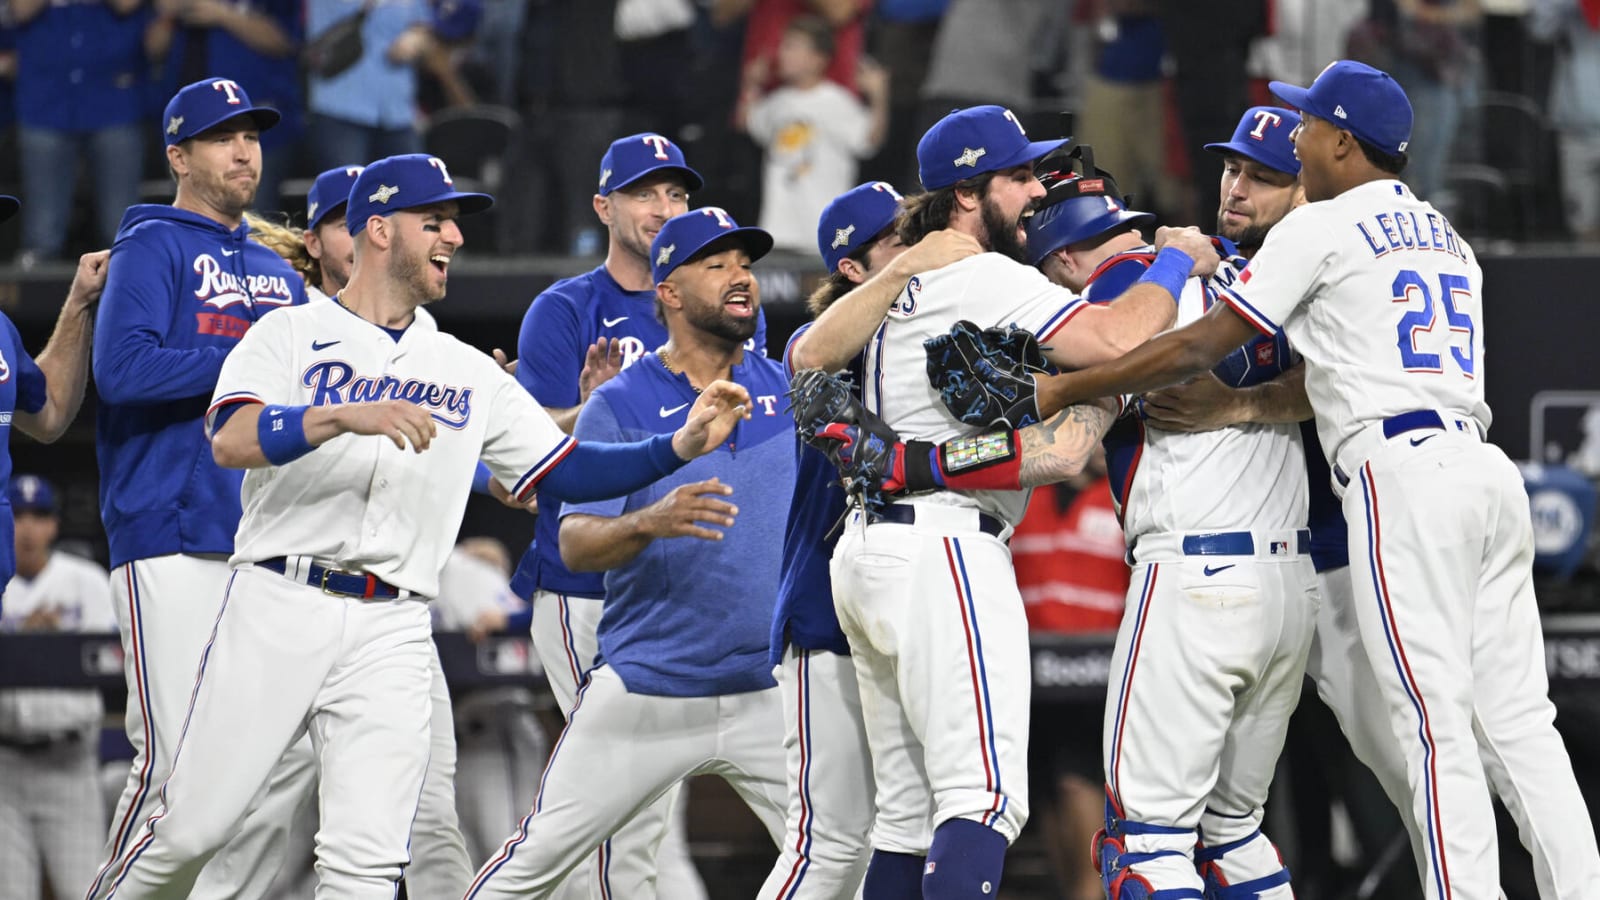 Rangers fans chant 'We want Houston' following ALDS sweep of Orioles